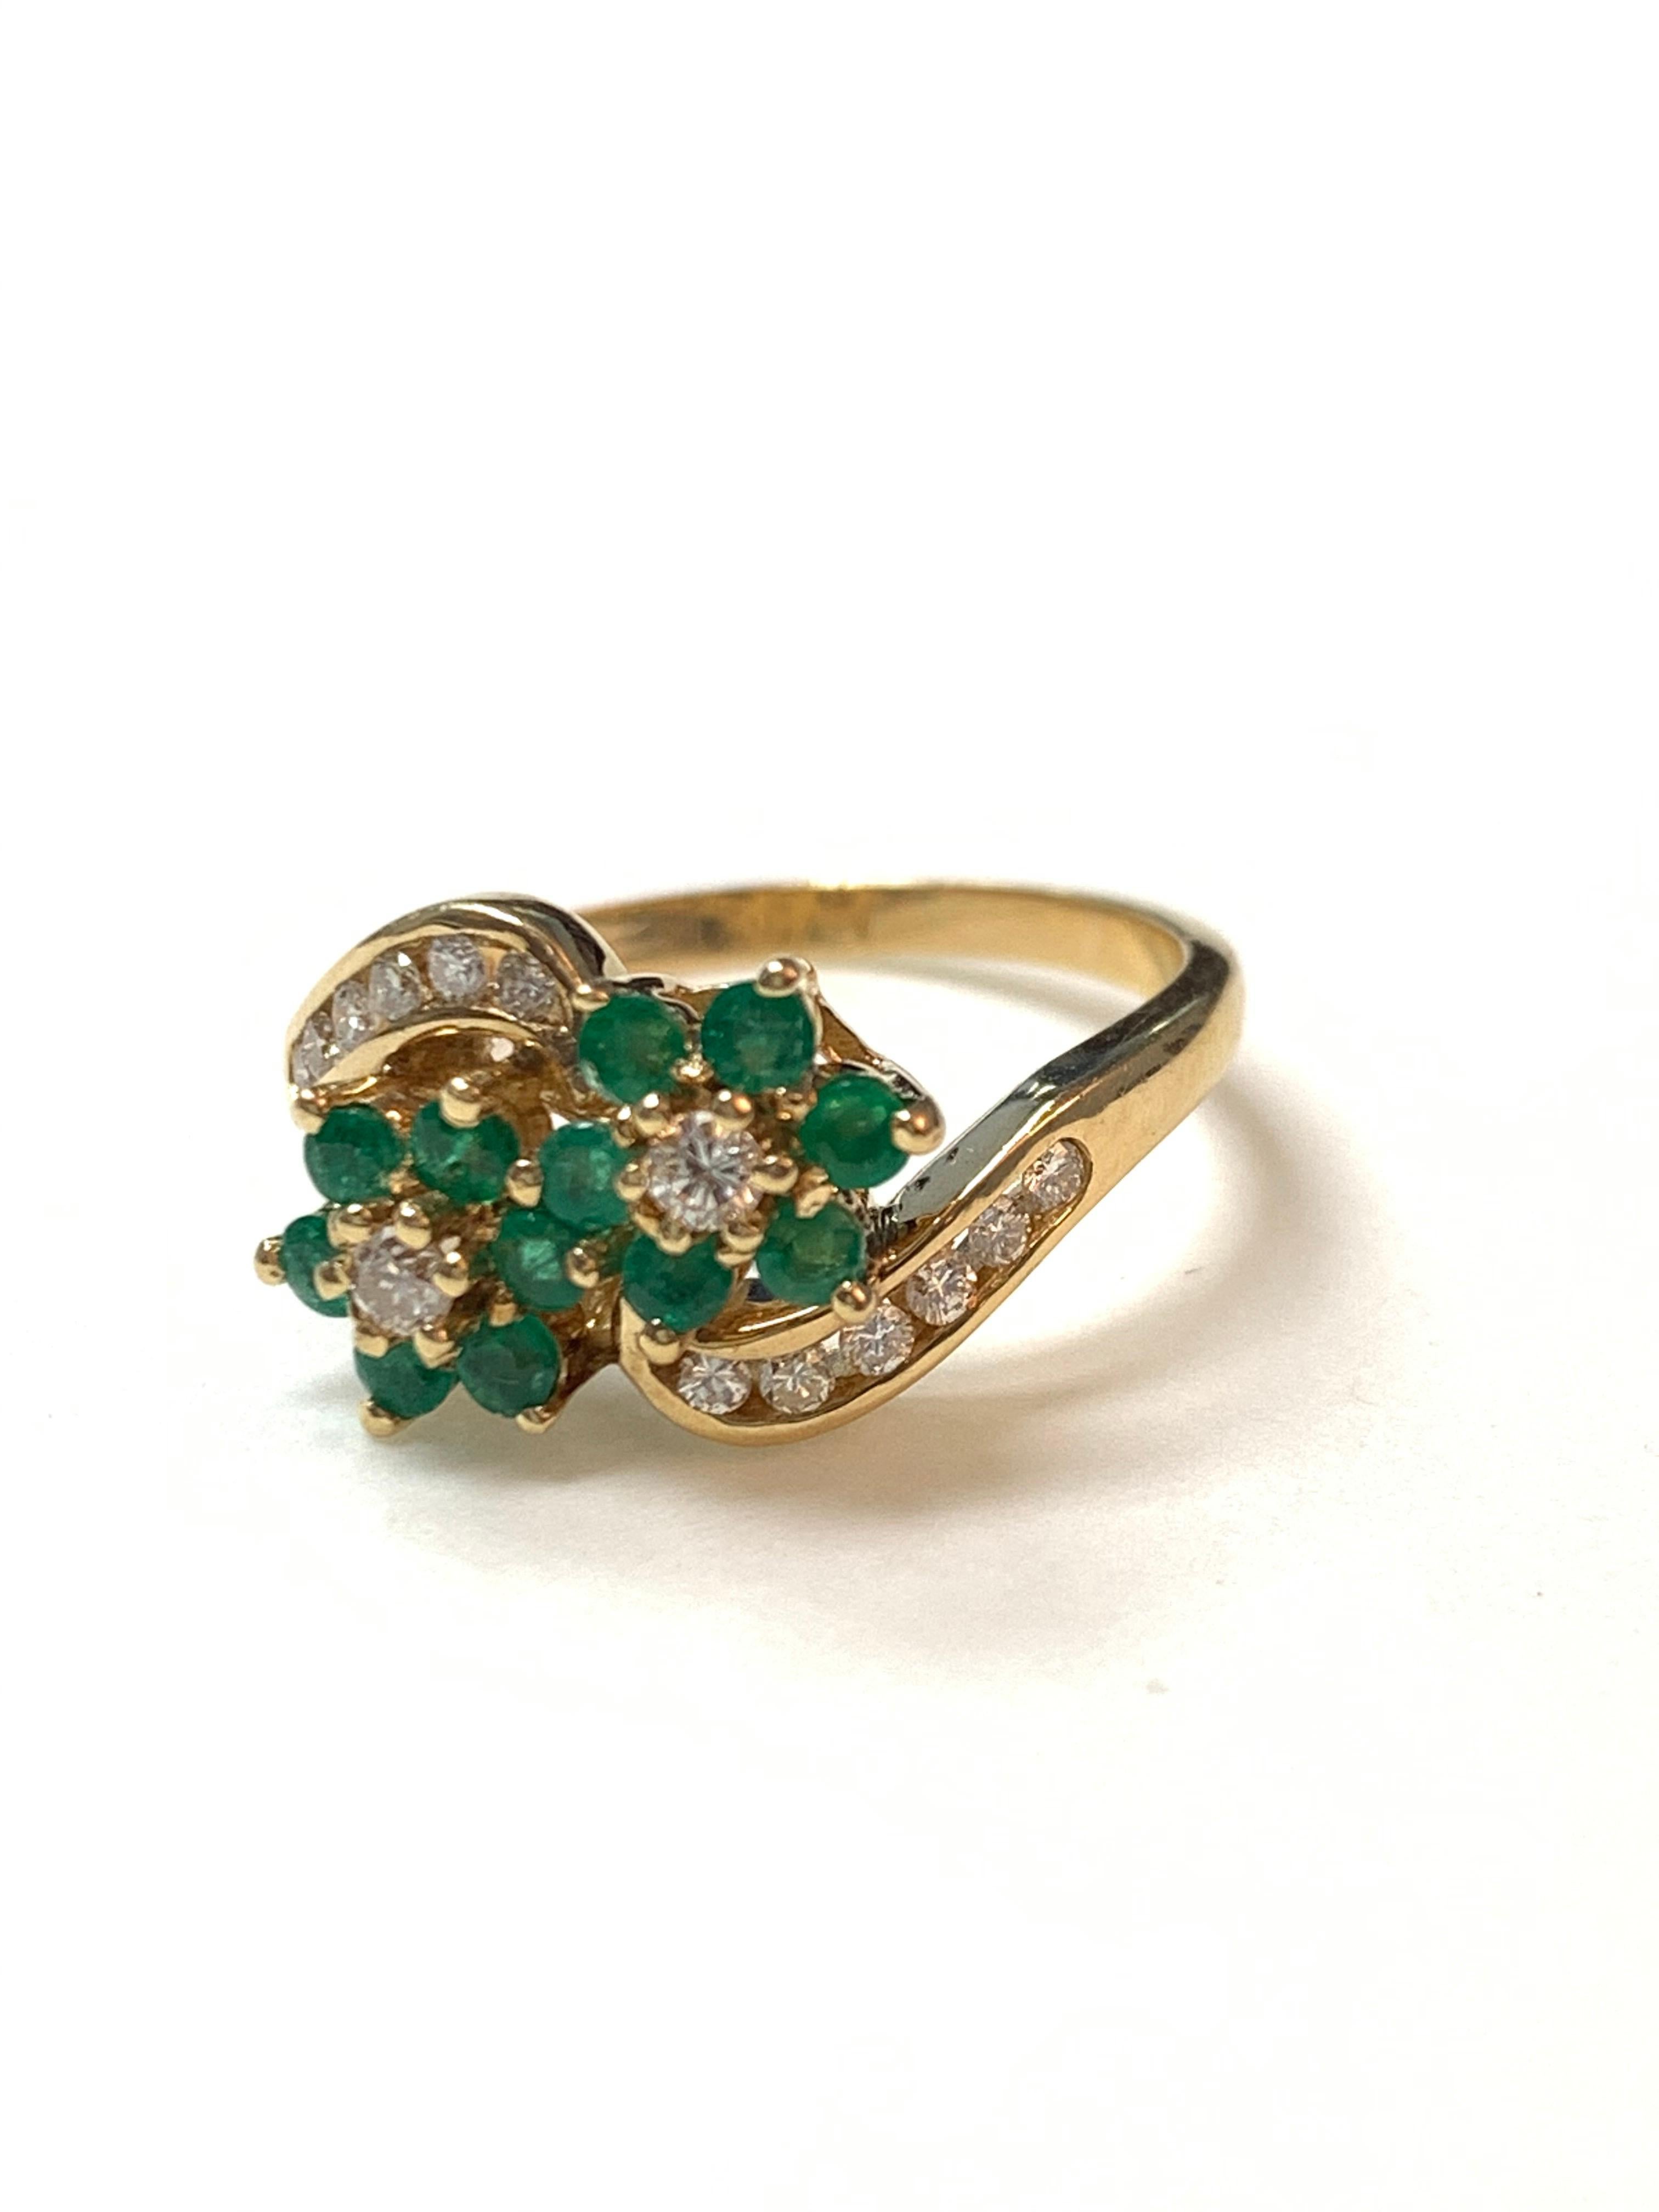 Diamond and emerald ring hand made in 14k yellow gold. 
The details are as follows : 
Diamond weight: 0.50 carat 
Emerald weight: 0.50 carat 
Metal : 14k yellow gold 
Ring size: 6 1/2 
